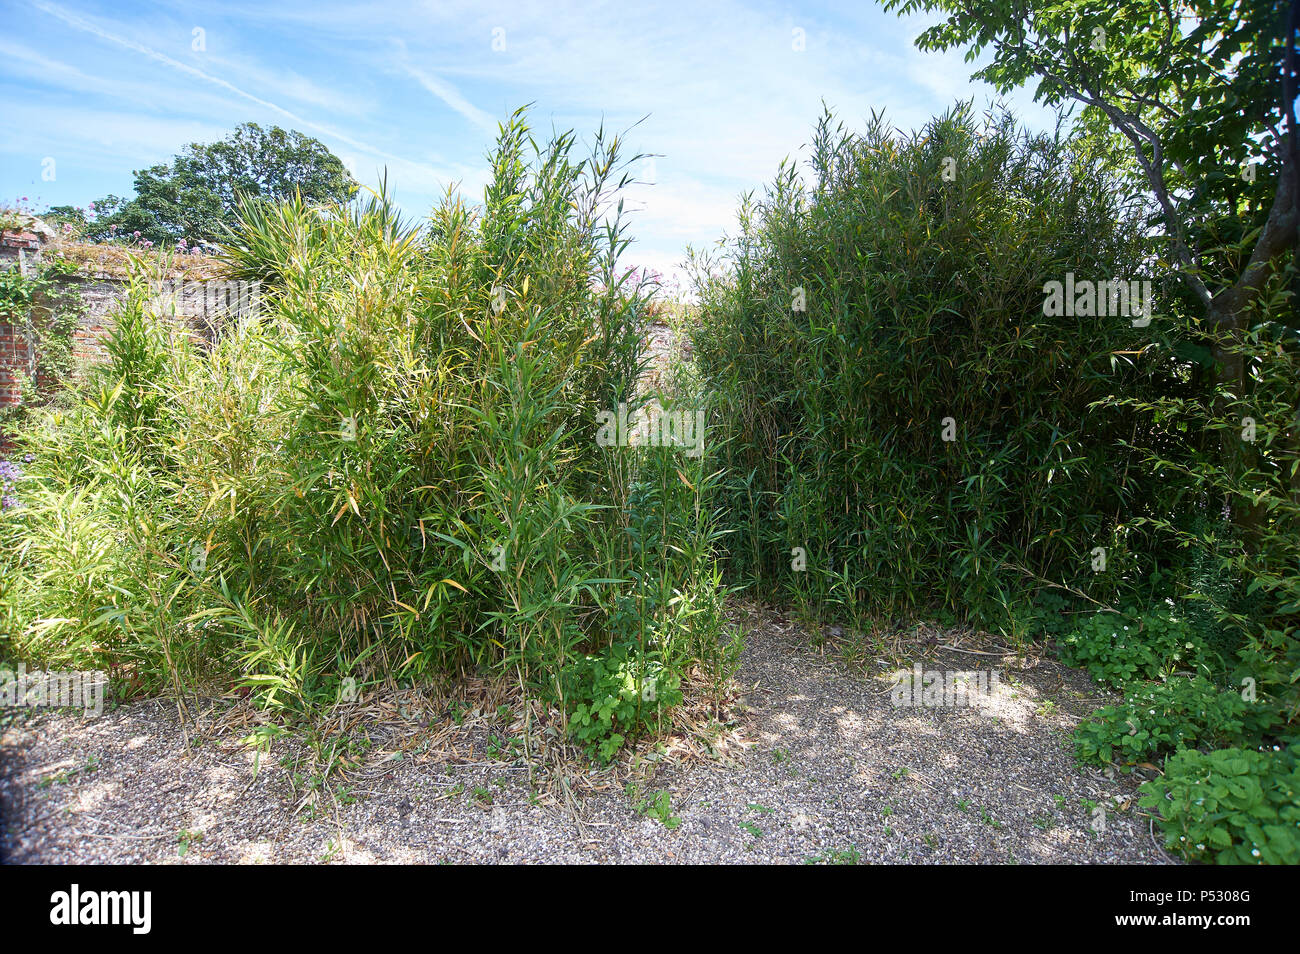 Bamboo (Phyllostachys propinqua) Growing in large clumps in an English garden during the summer. UK, GB. Stock Photo